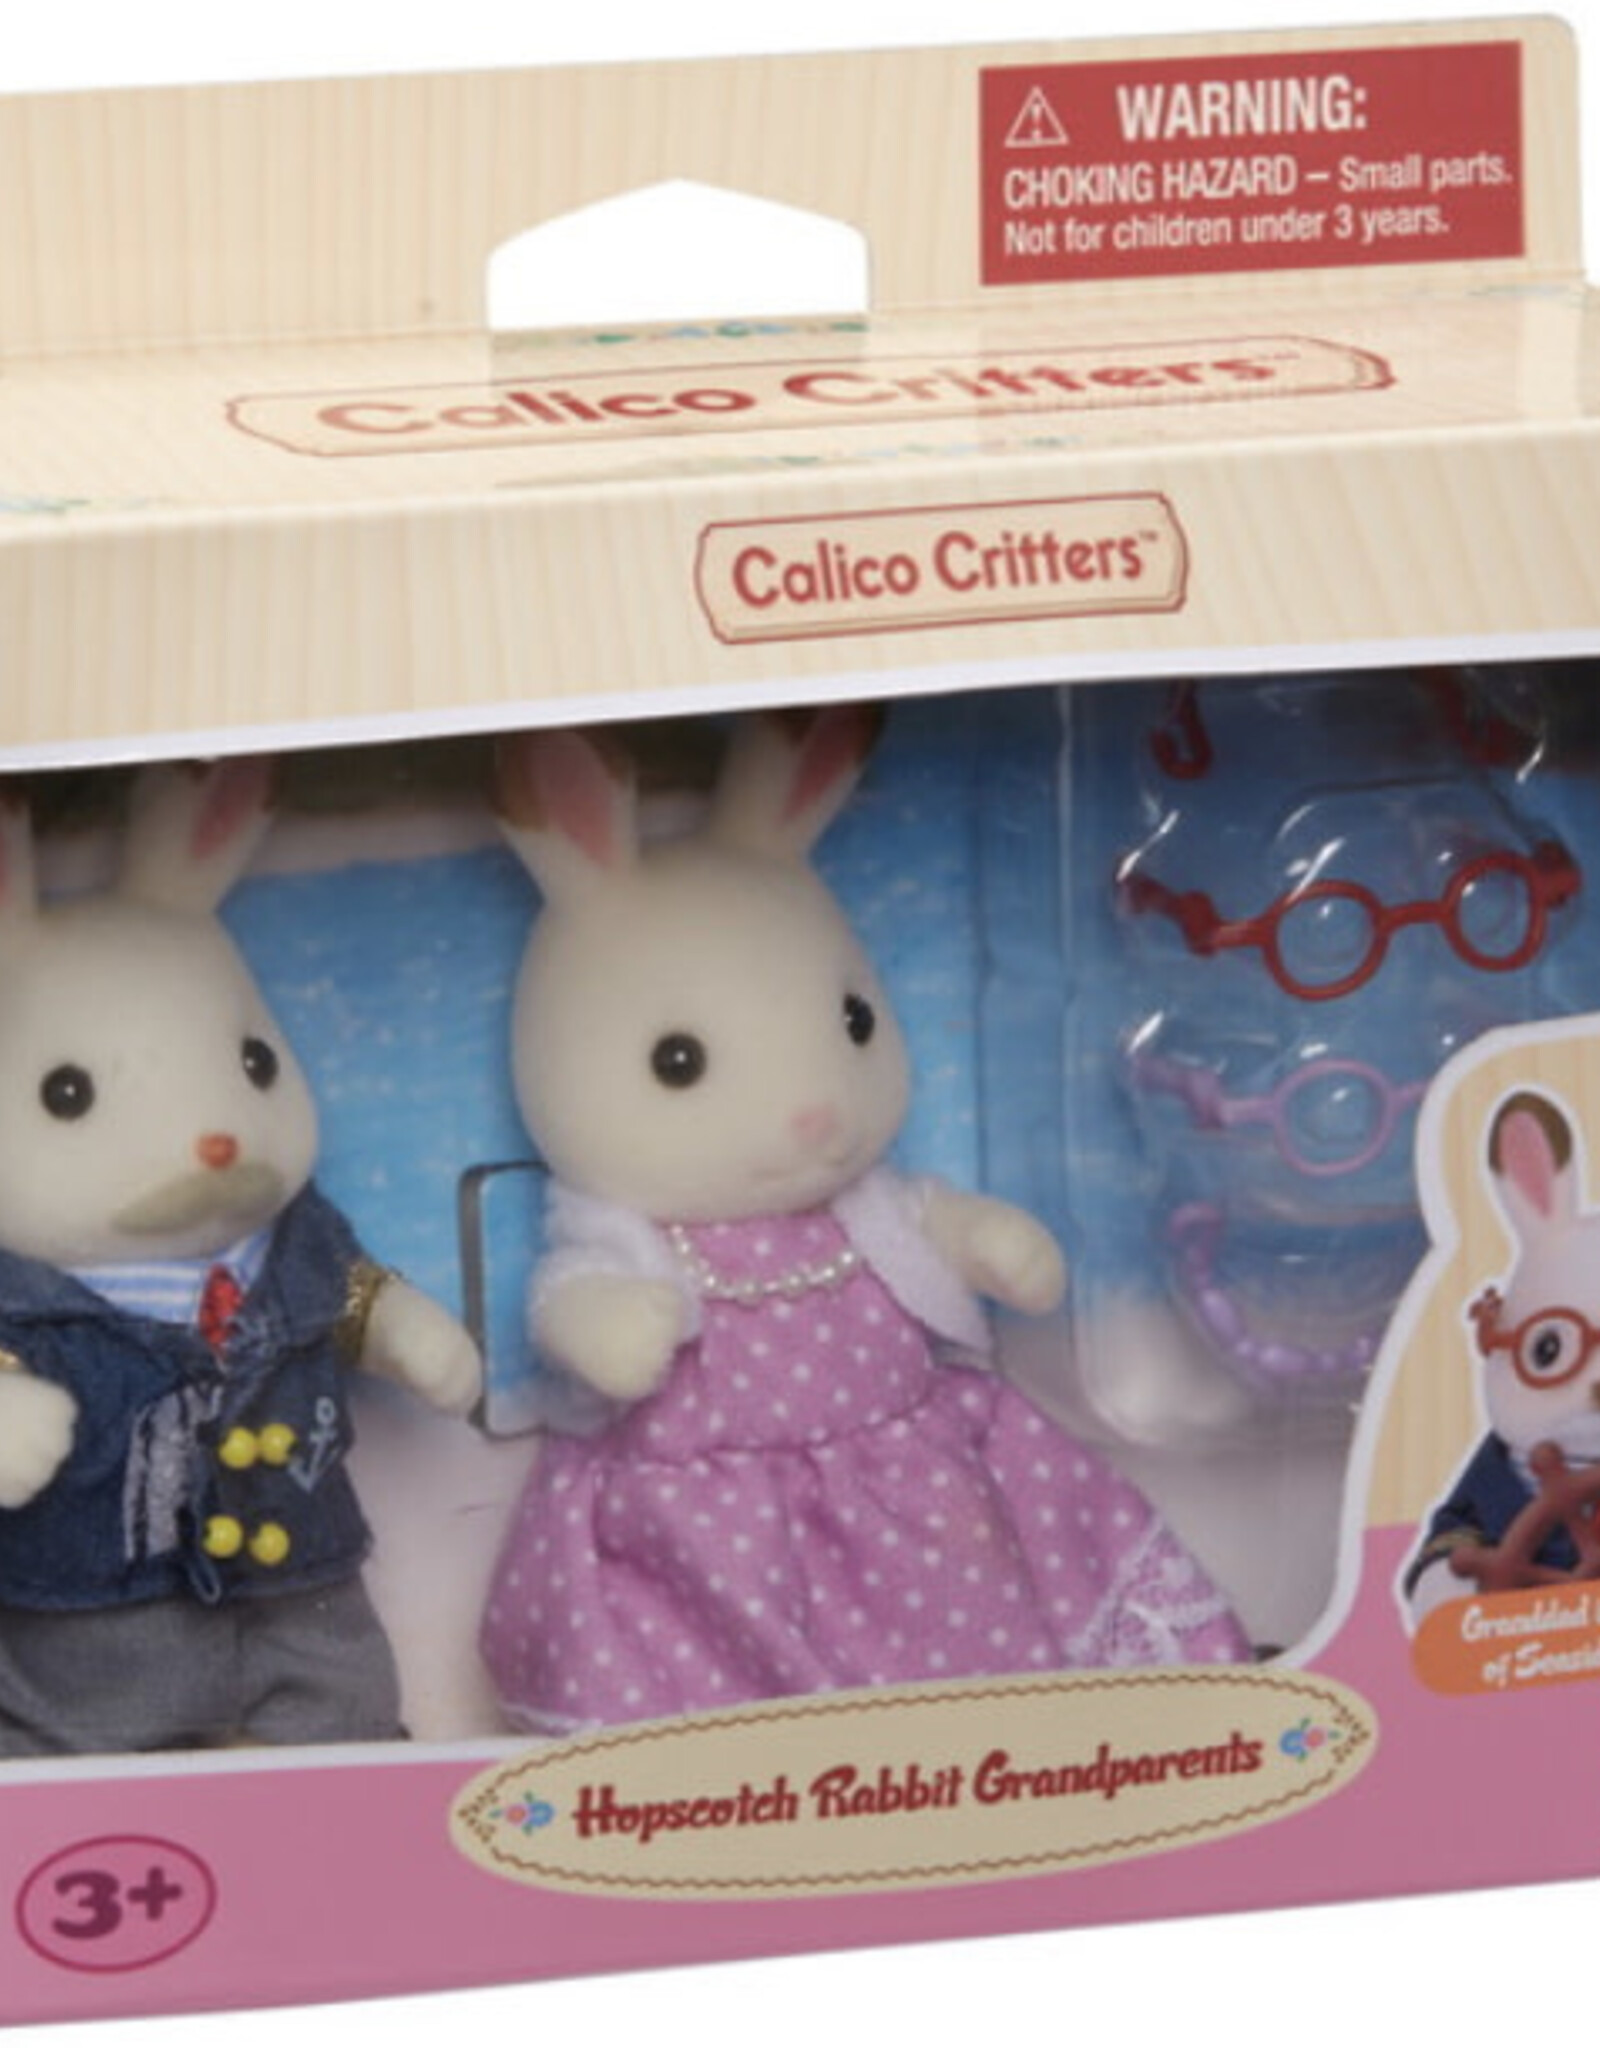 Calico Critters Calico Critters Chocolate Grandparents